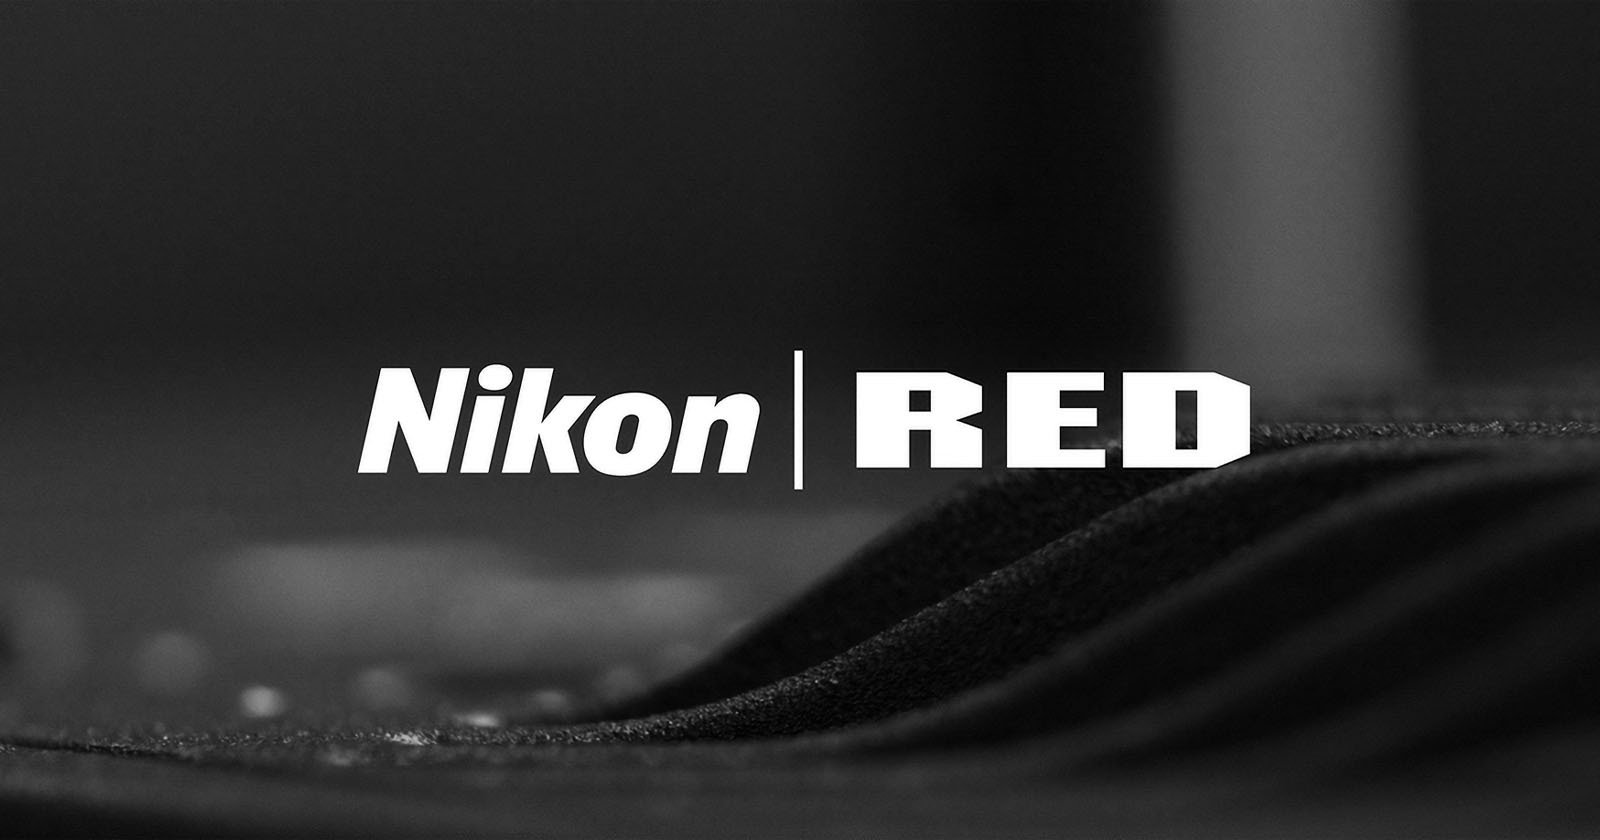  nikon bought red just 85m 